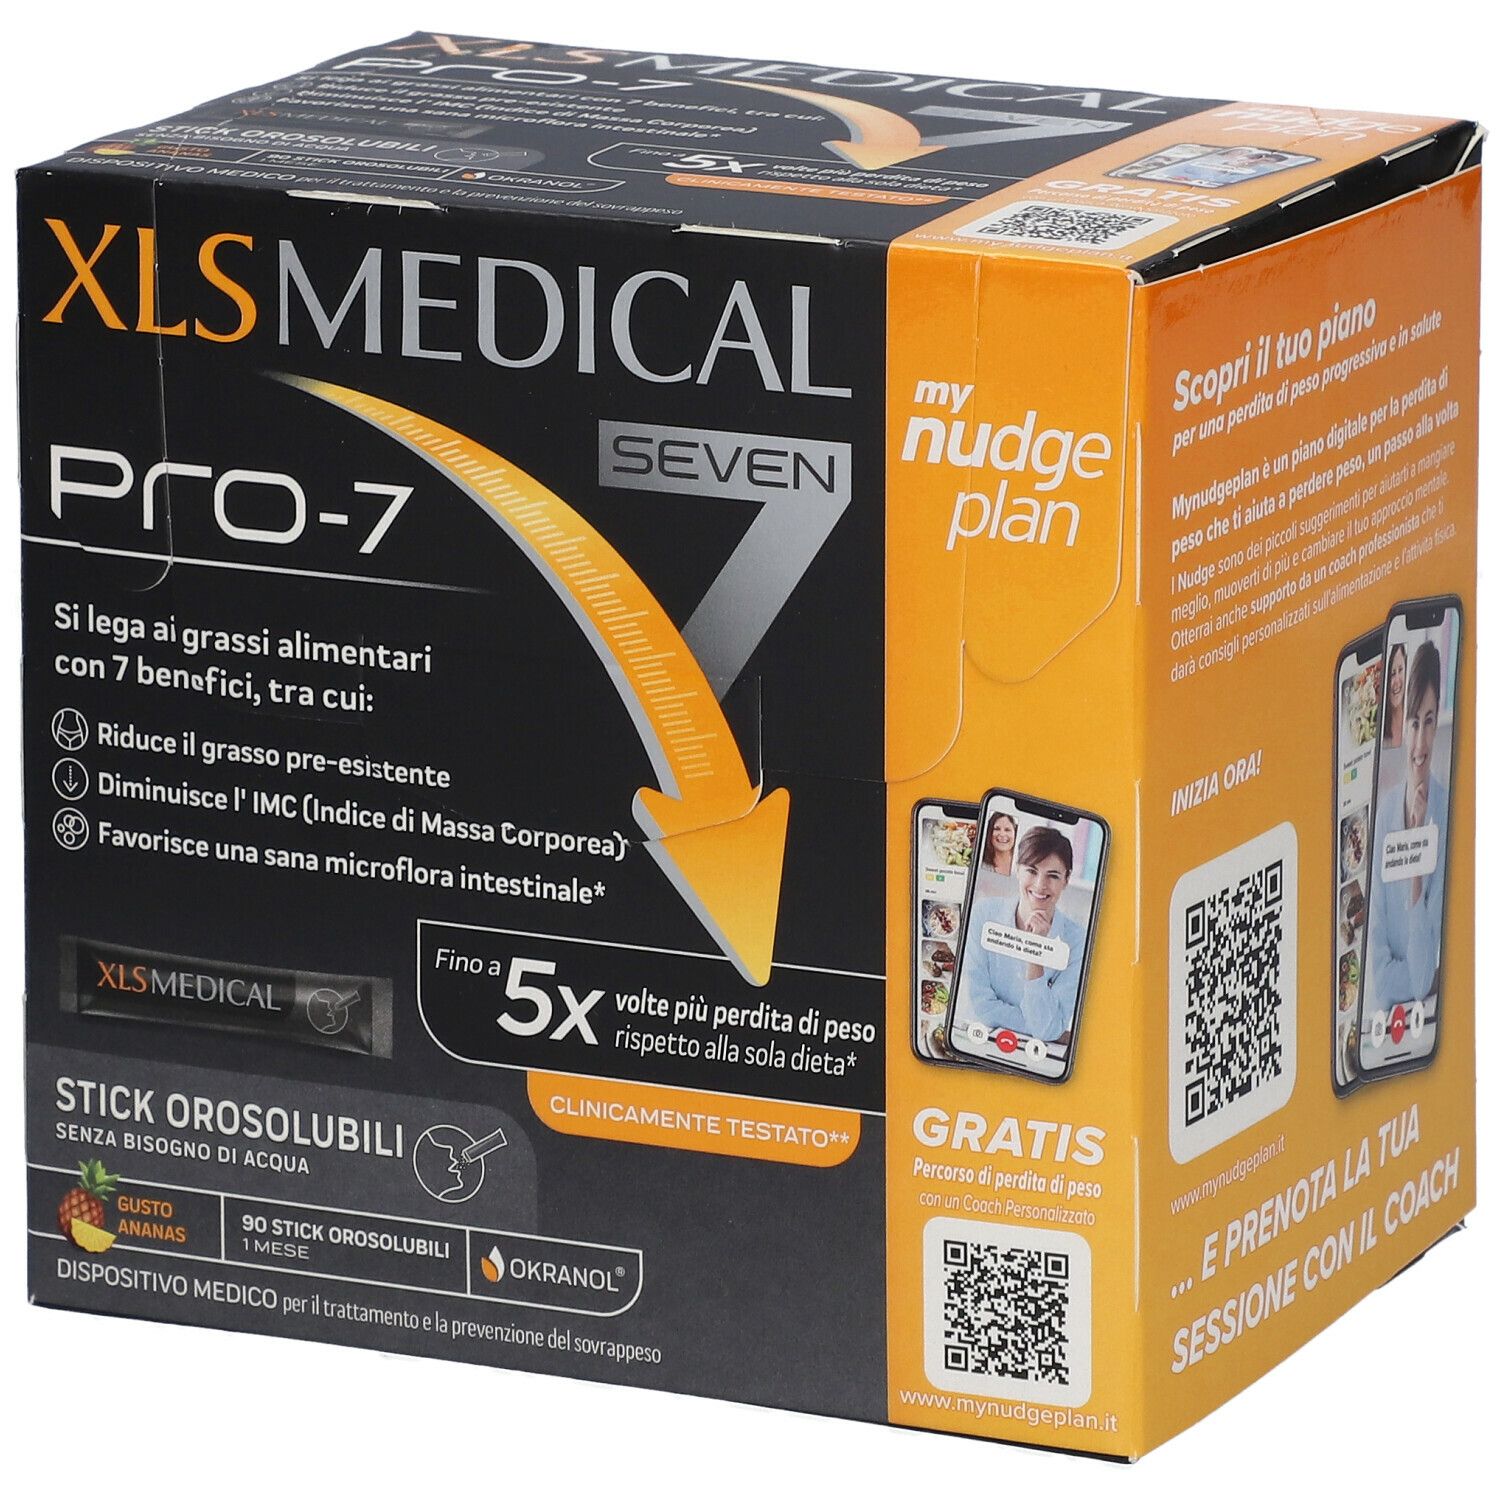 Image of XL-S MEDICAL PRO-7